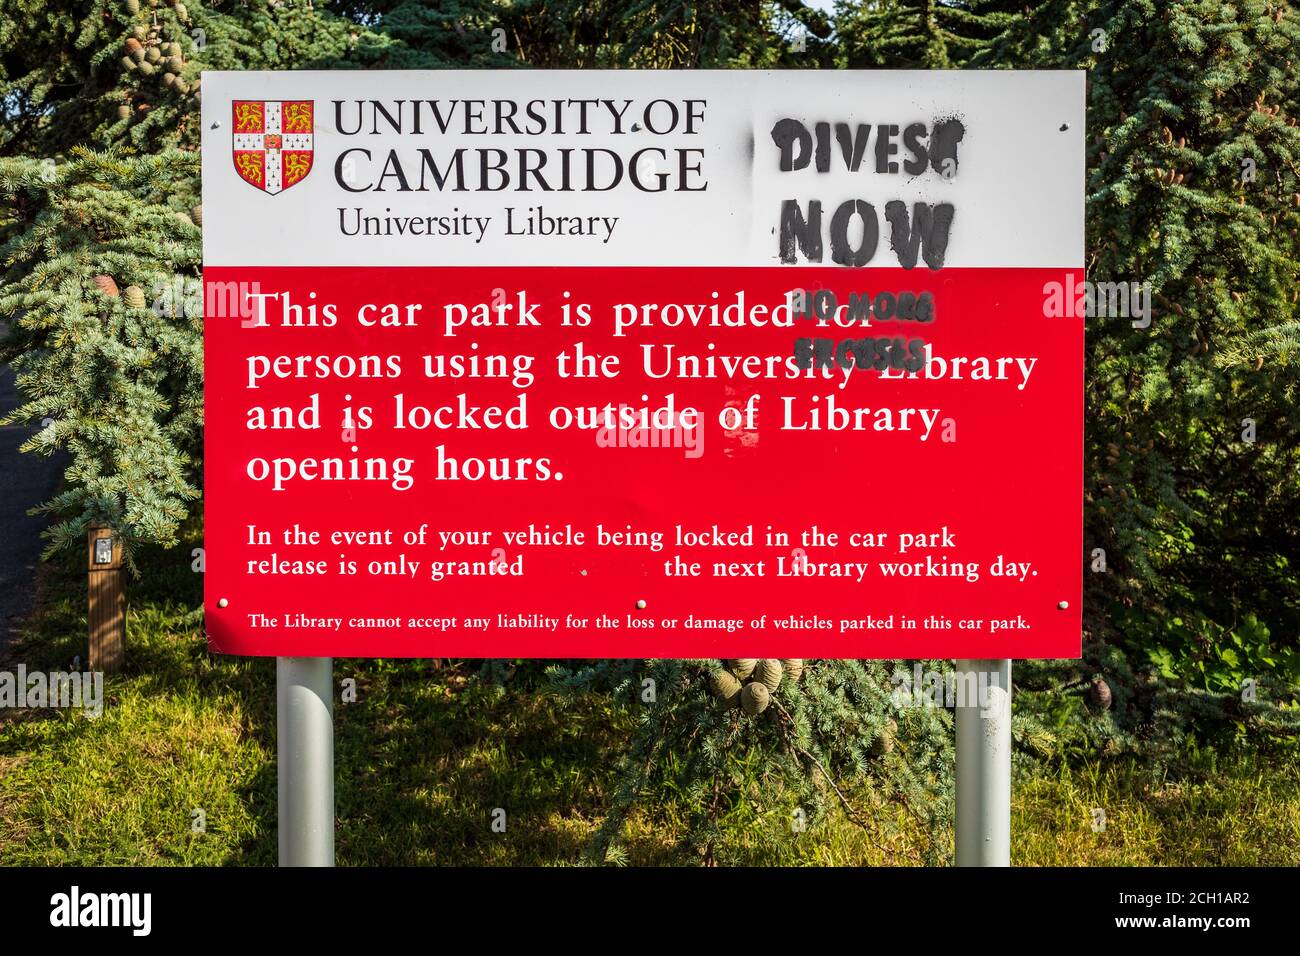 Cambridge University Divest Now protests - Divest protest painted onto signs in the ground of the Cambridge University Library. Stock Photo